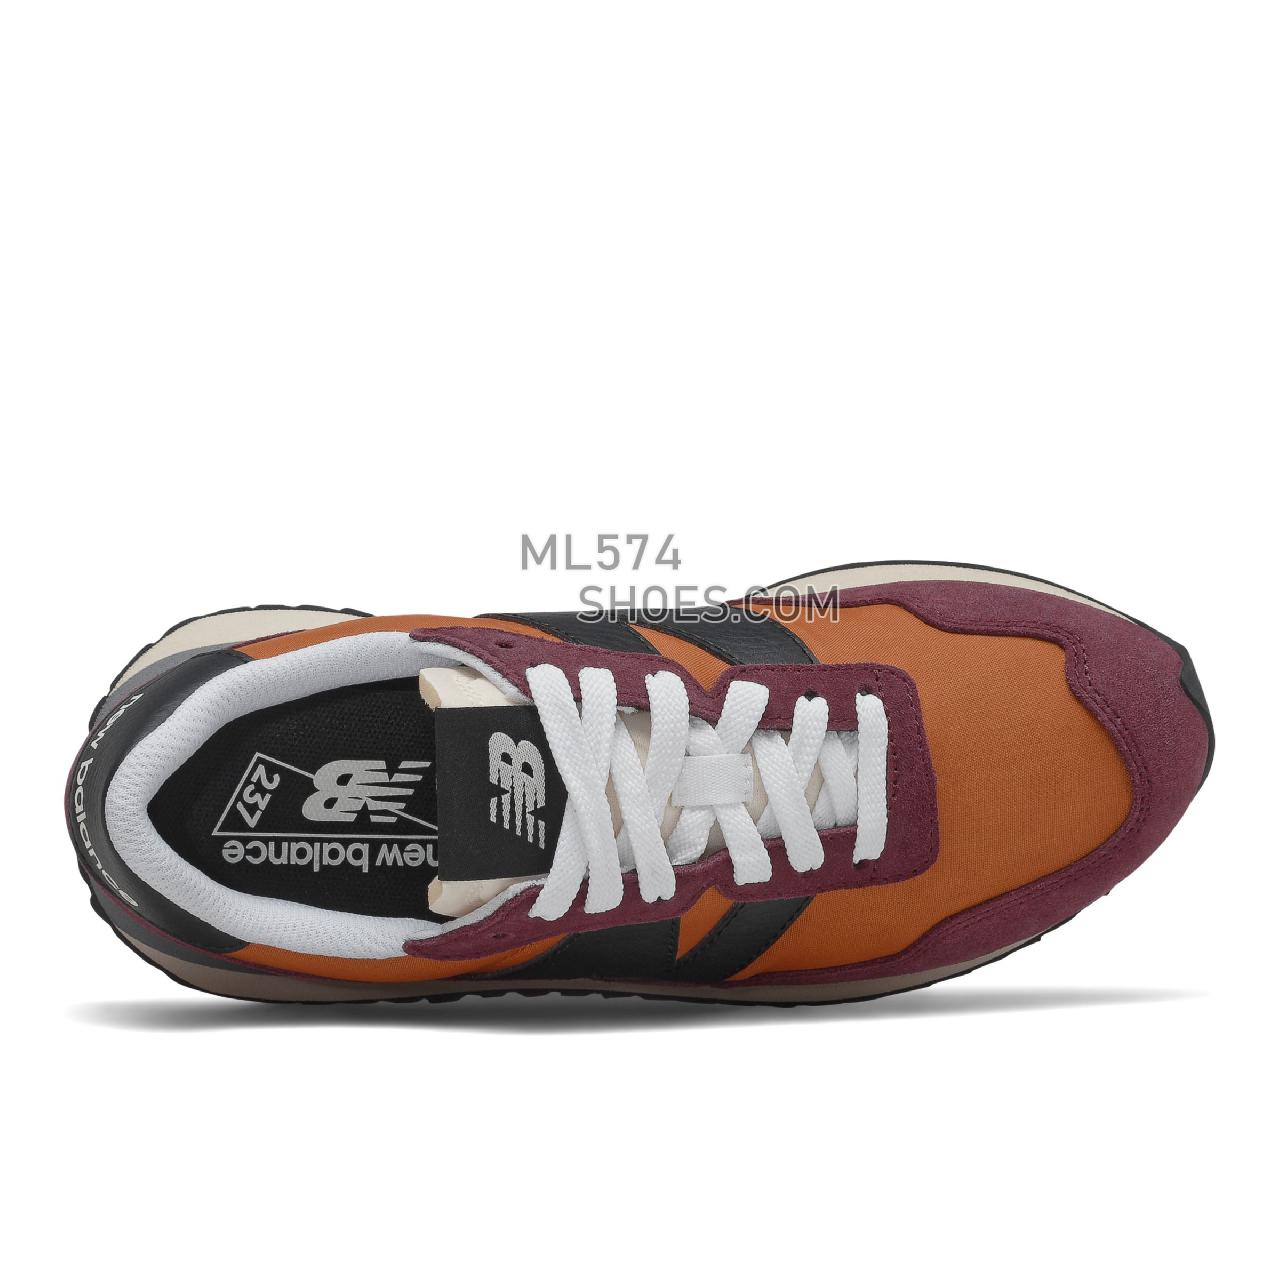 New Balance 237 - Women's Classic Sneakers - Vintage Orange with Nb Burgundy - WS237SC